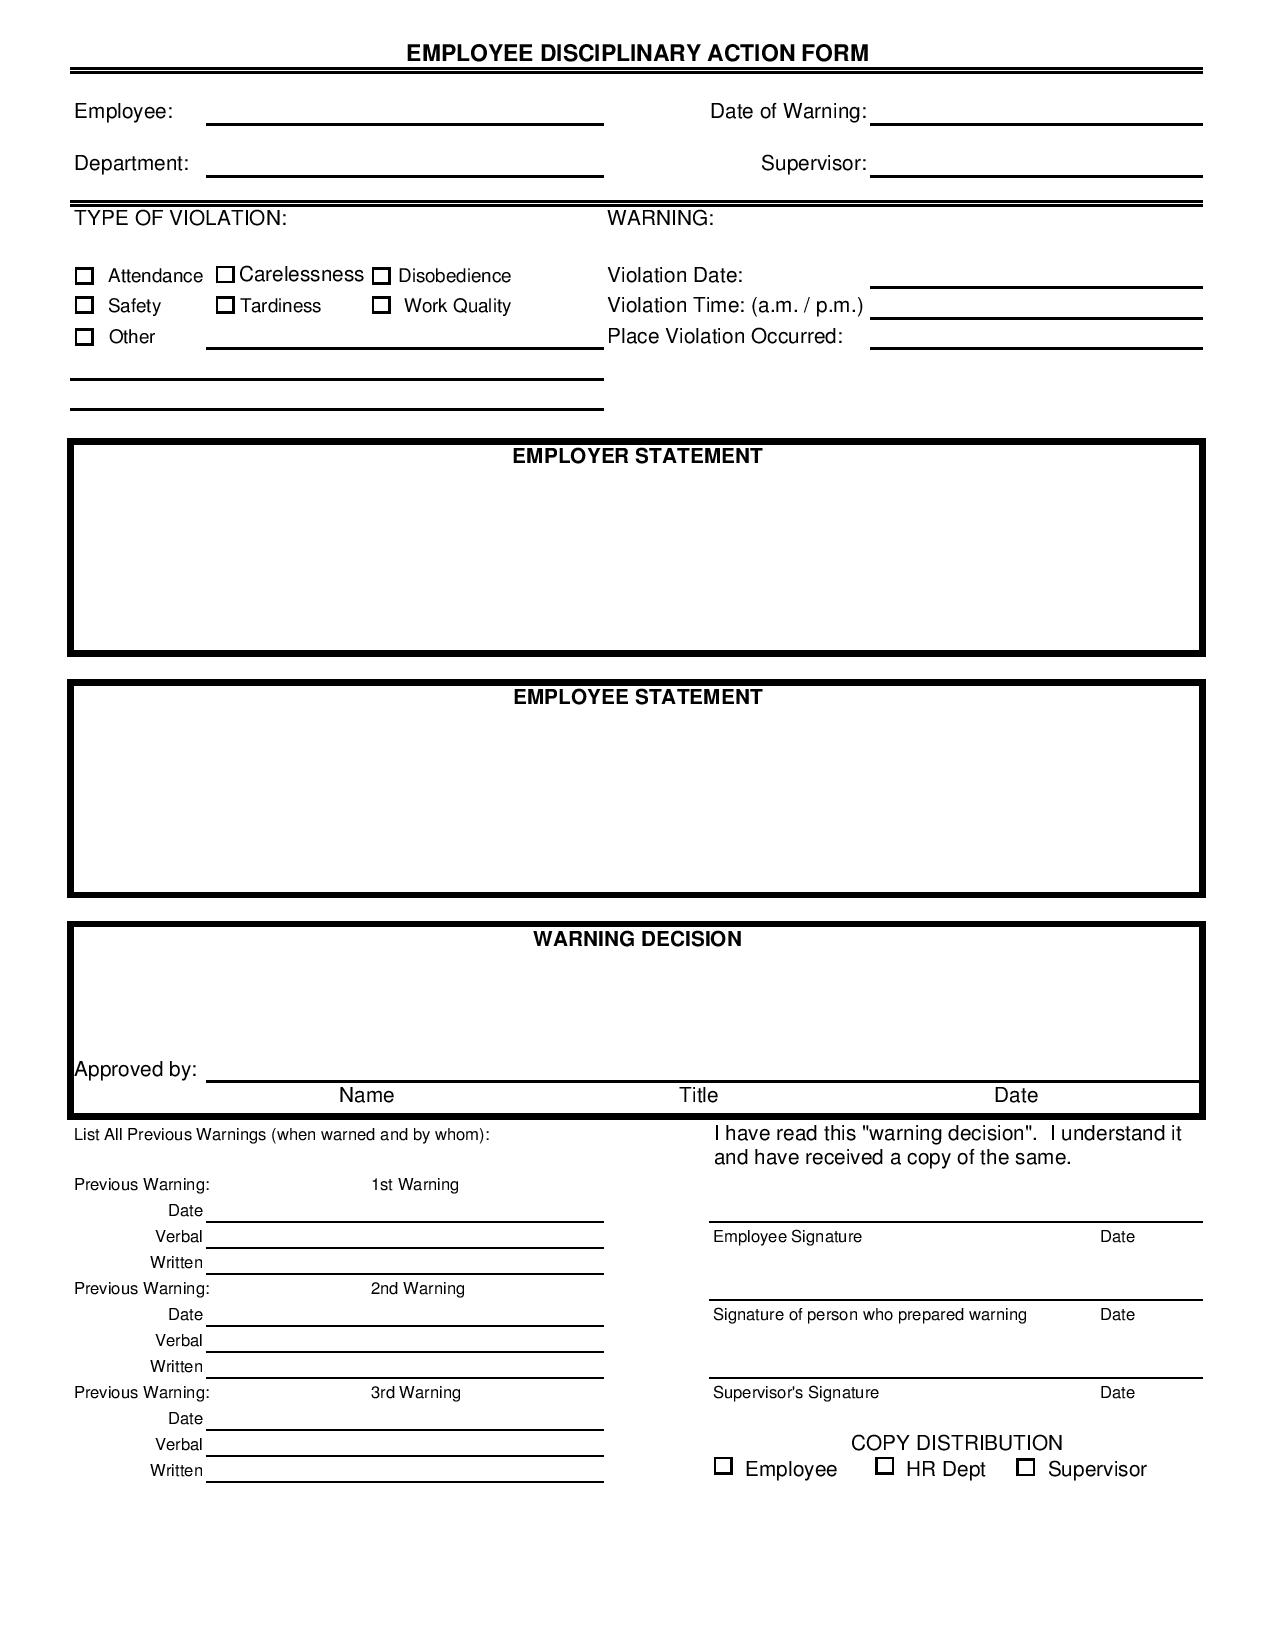 employee disciplinary action form page 0012